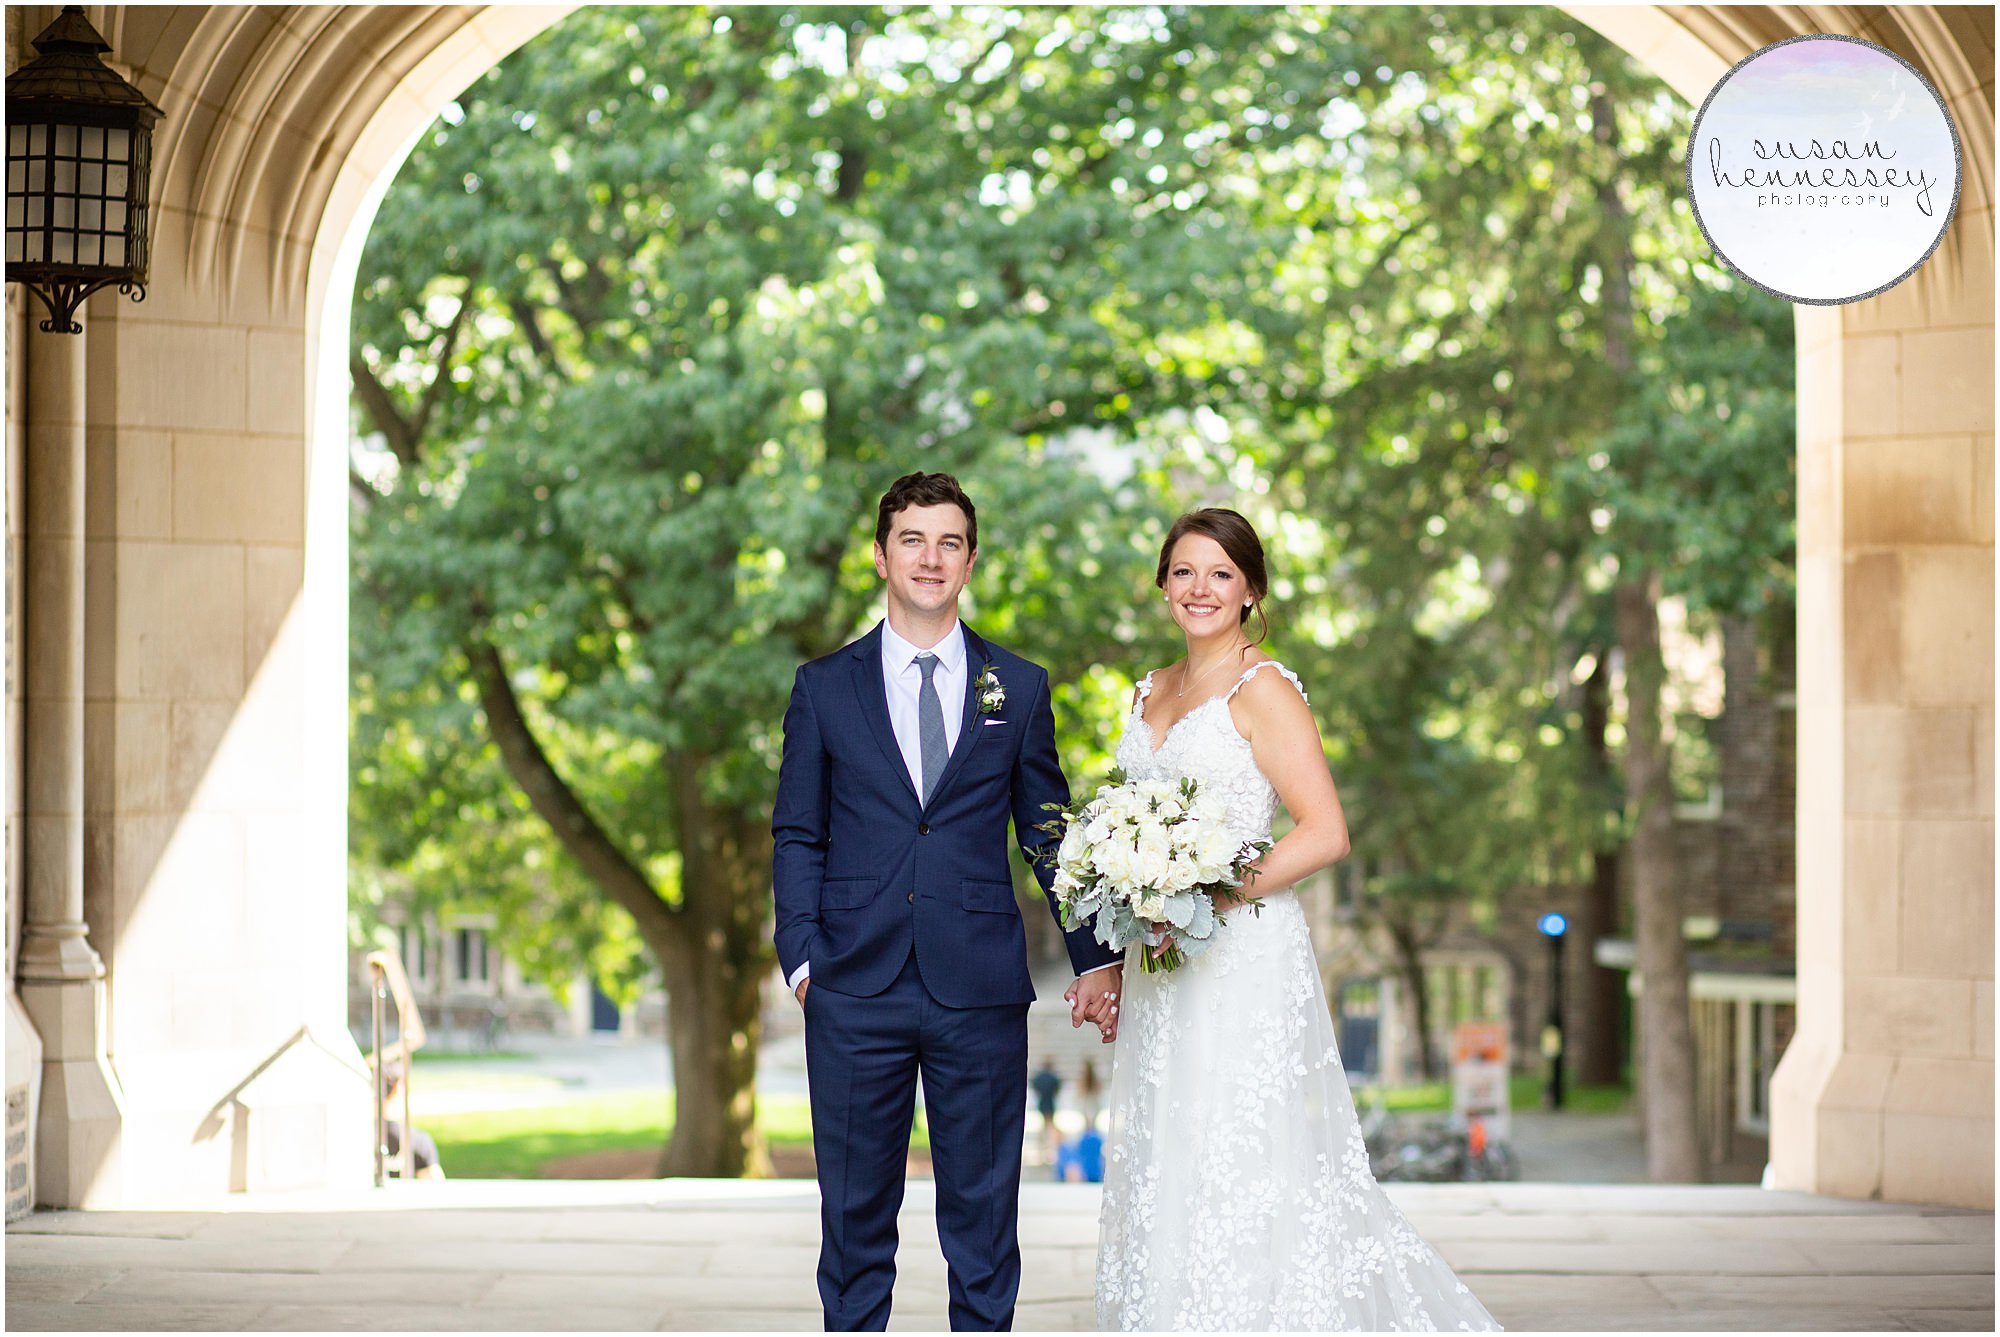 Bride and groom portraits at Summer wedding 